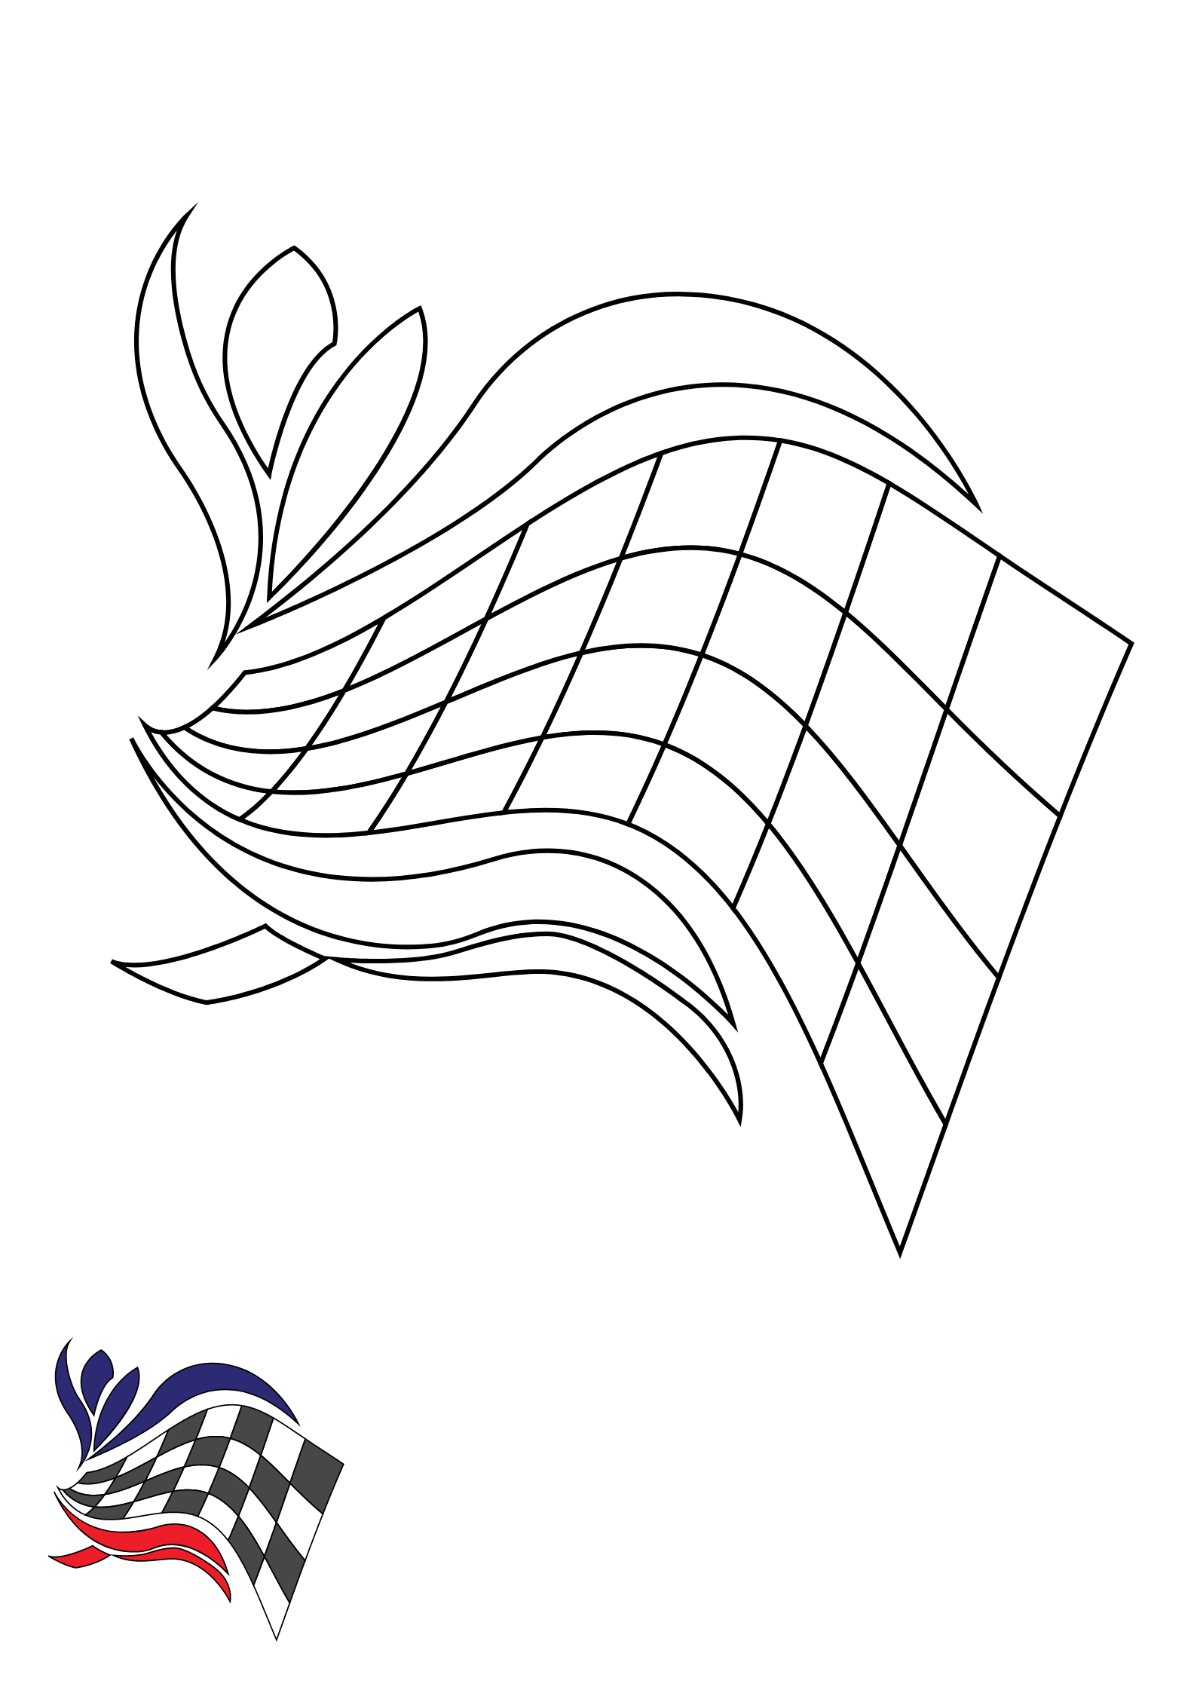 Tribal Checkered Flag coloring page Template